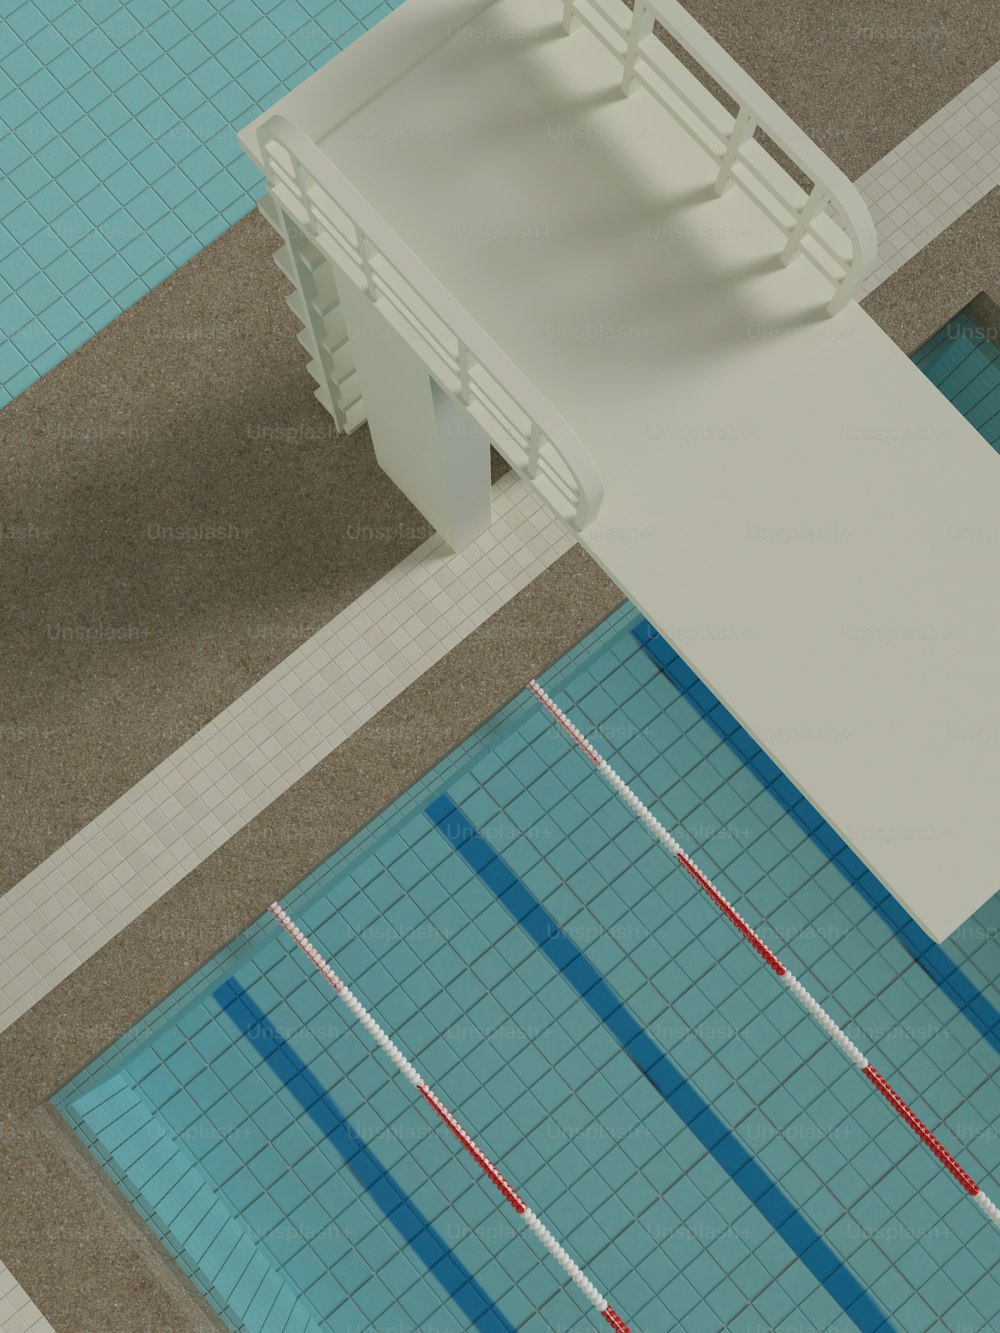 an overhead view of a swimming pool with a ladder